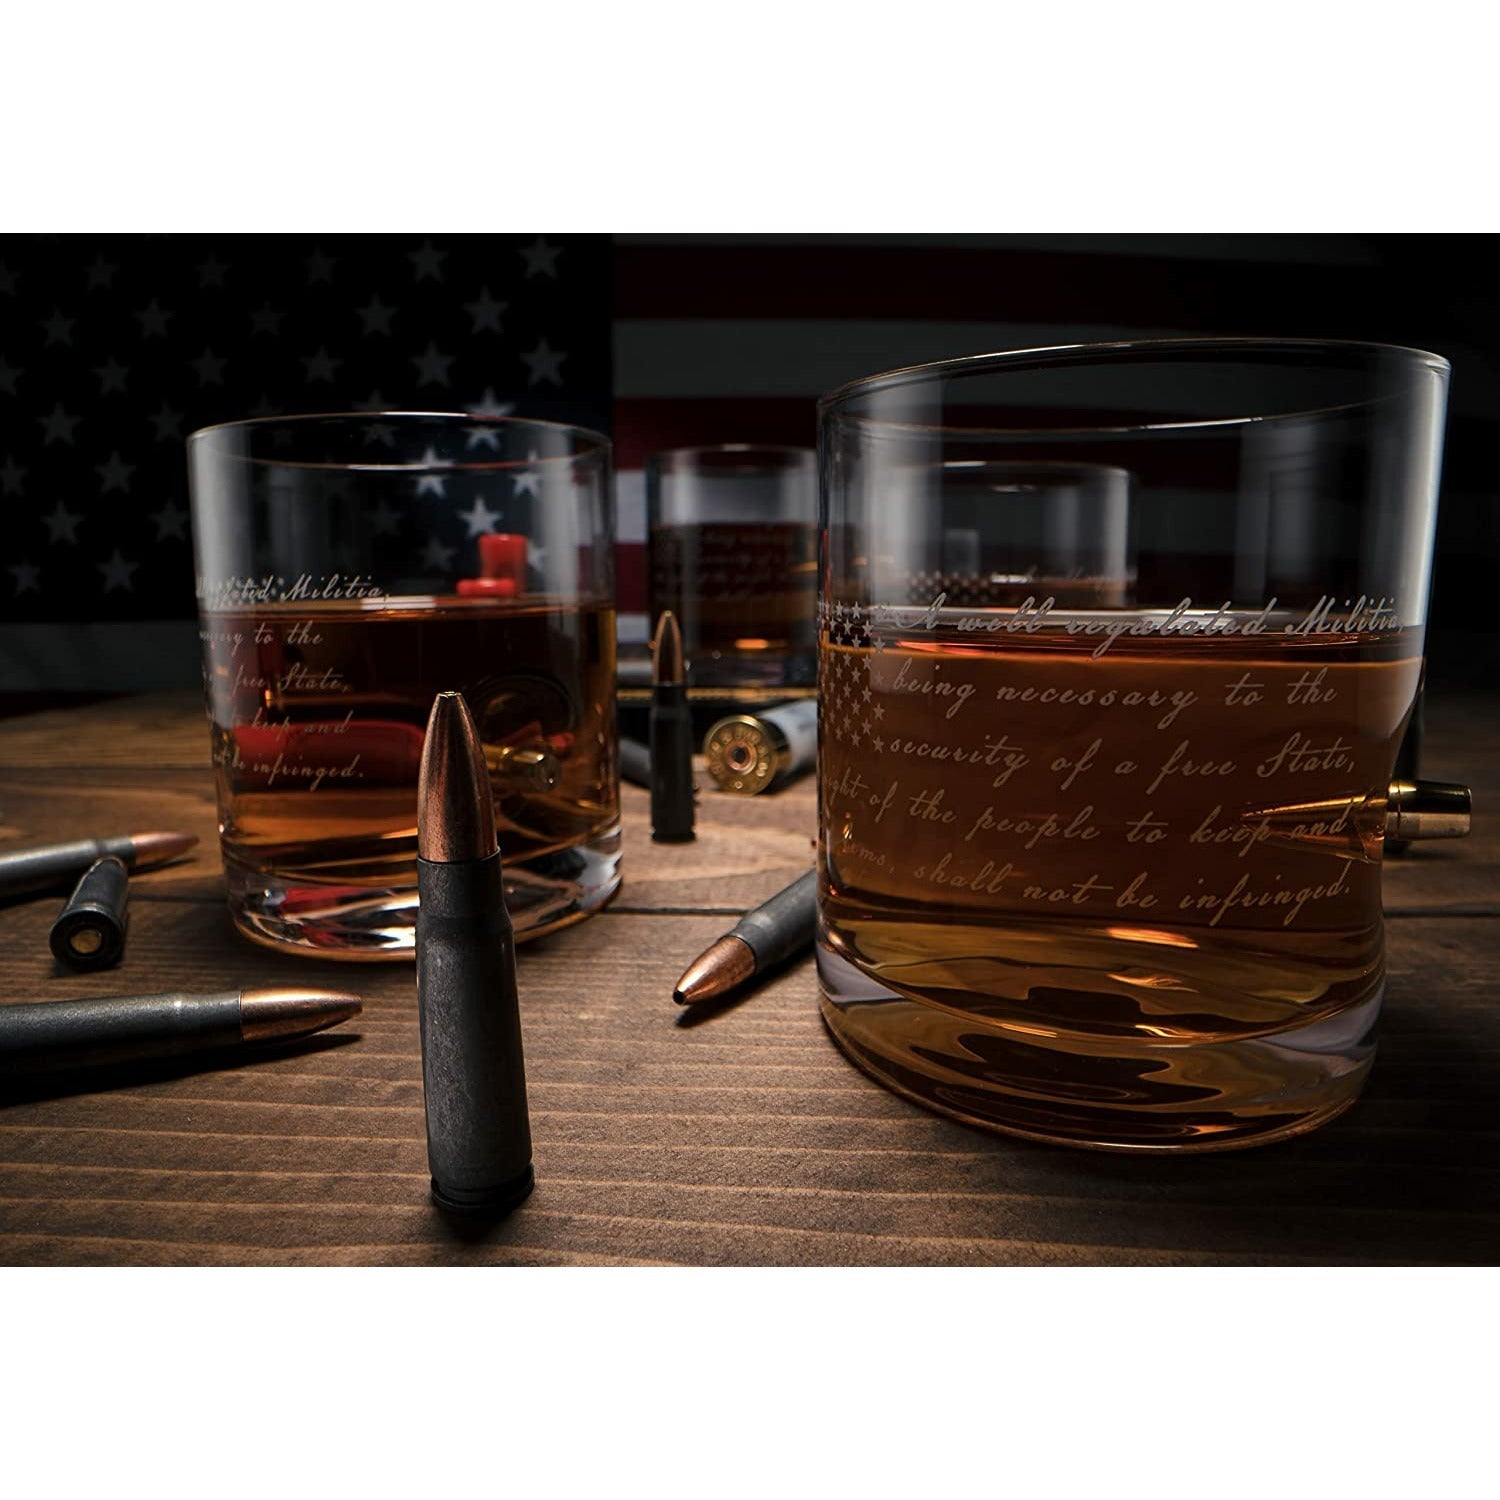 2nd Amendment American Flag Bullet Glasses .308 Real Solid Copper Projectile, Set of 4 Hand Blown Old Fashioned Whiskey Rocks Glasses, Wood Flag Tray with Patriots Gun Rights Law & Military Gift Set-3